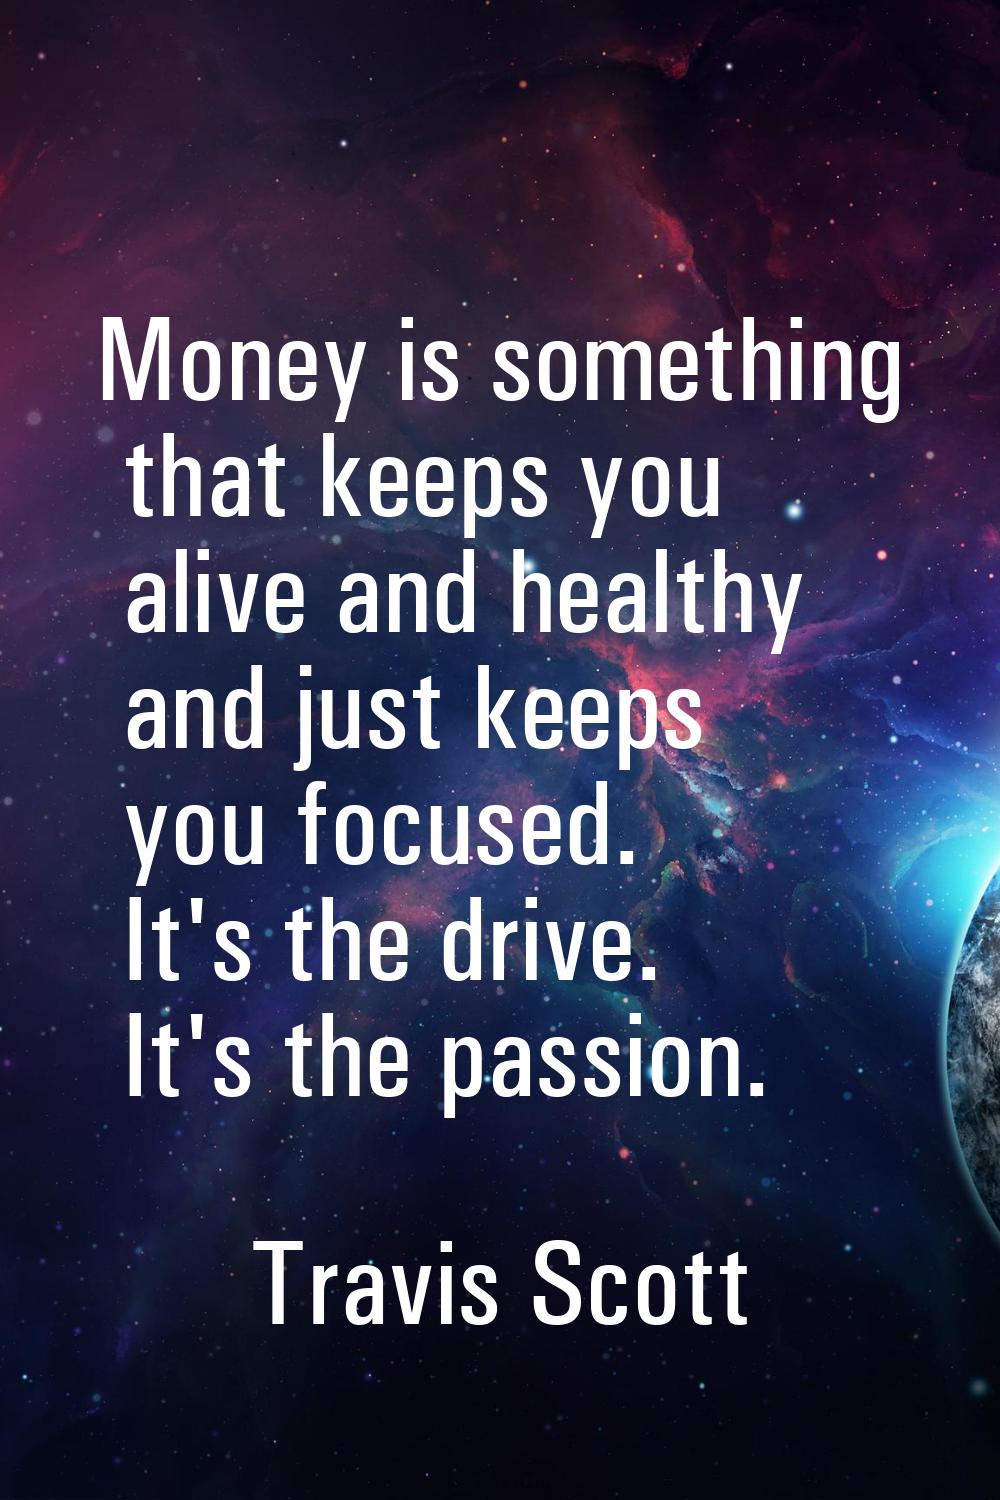 Money is something that keeps you alive and healthy and just keeps you focused. It's the drive. It'